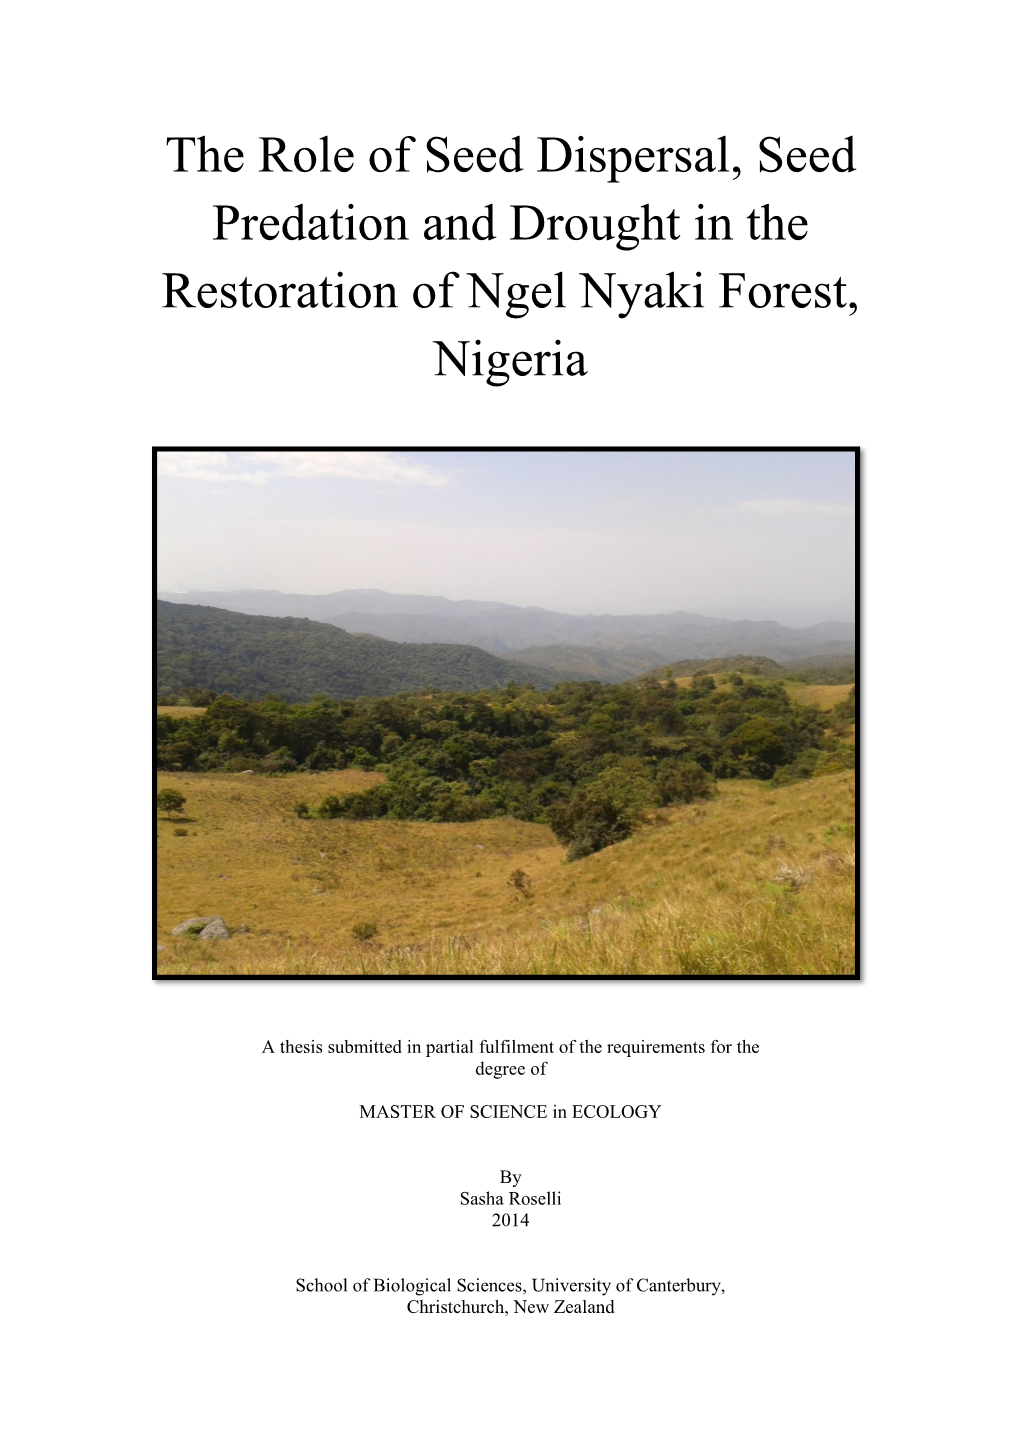 The Role of Seed Dispersal, Seed Predation and Drought in the Restoration of Ngel Nyaki Forest, Nigeria